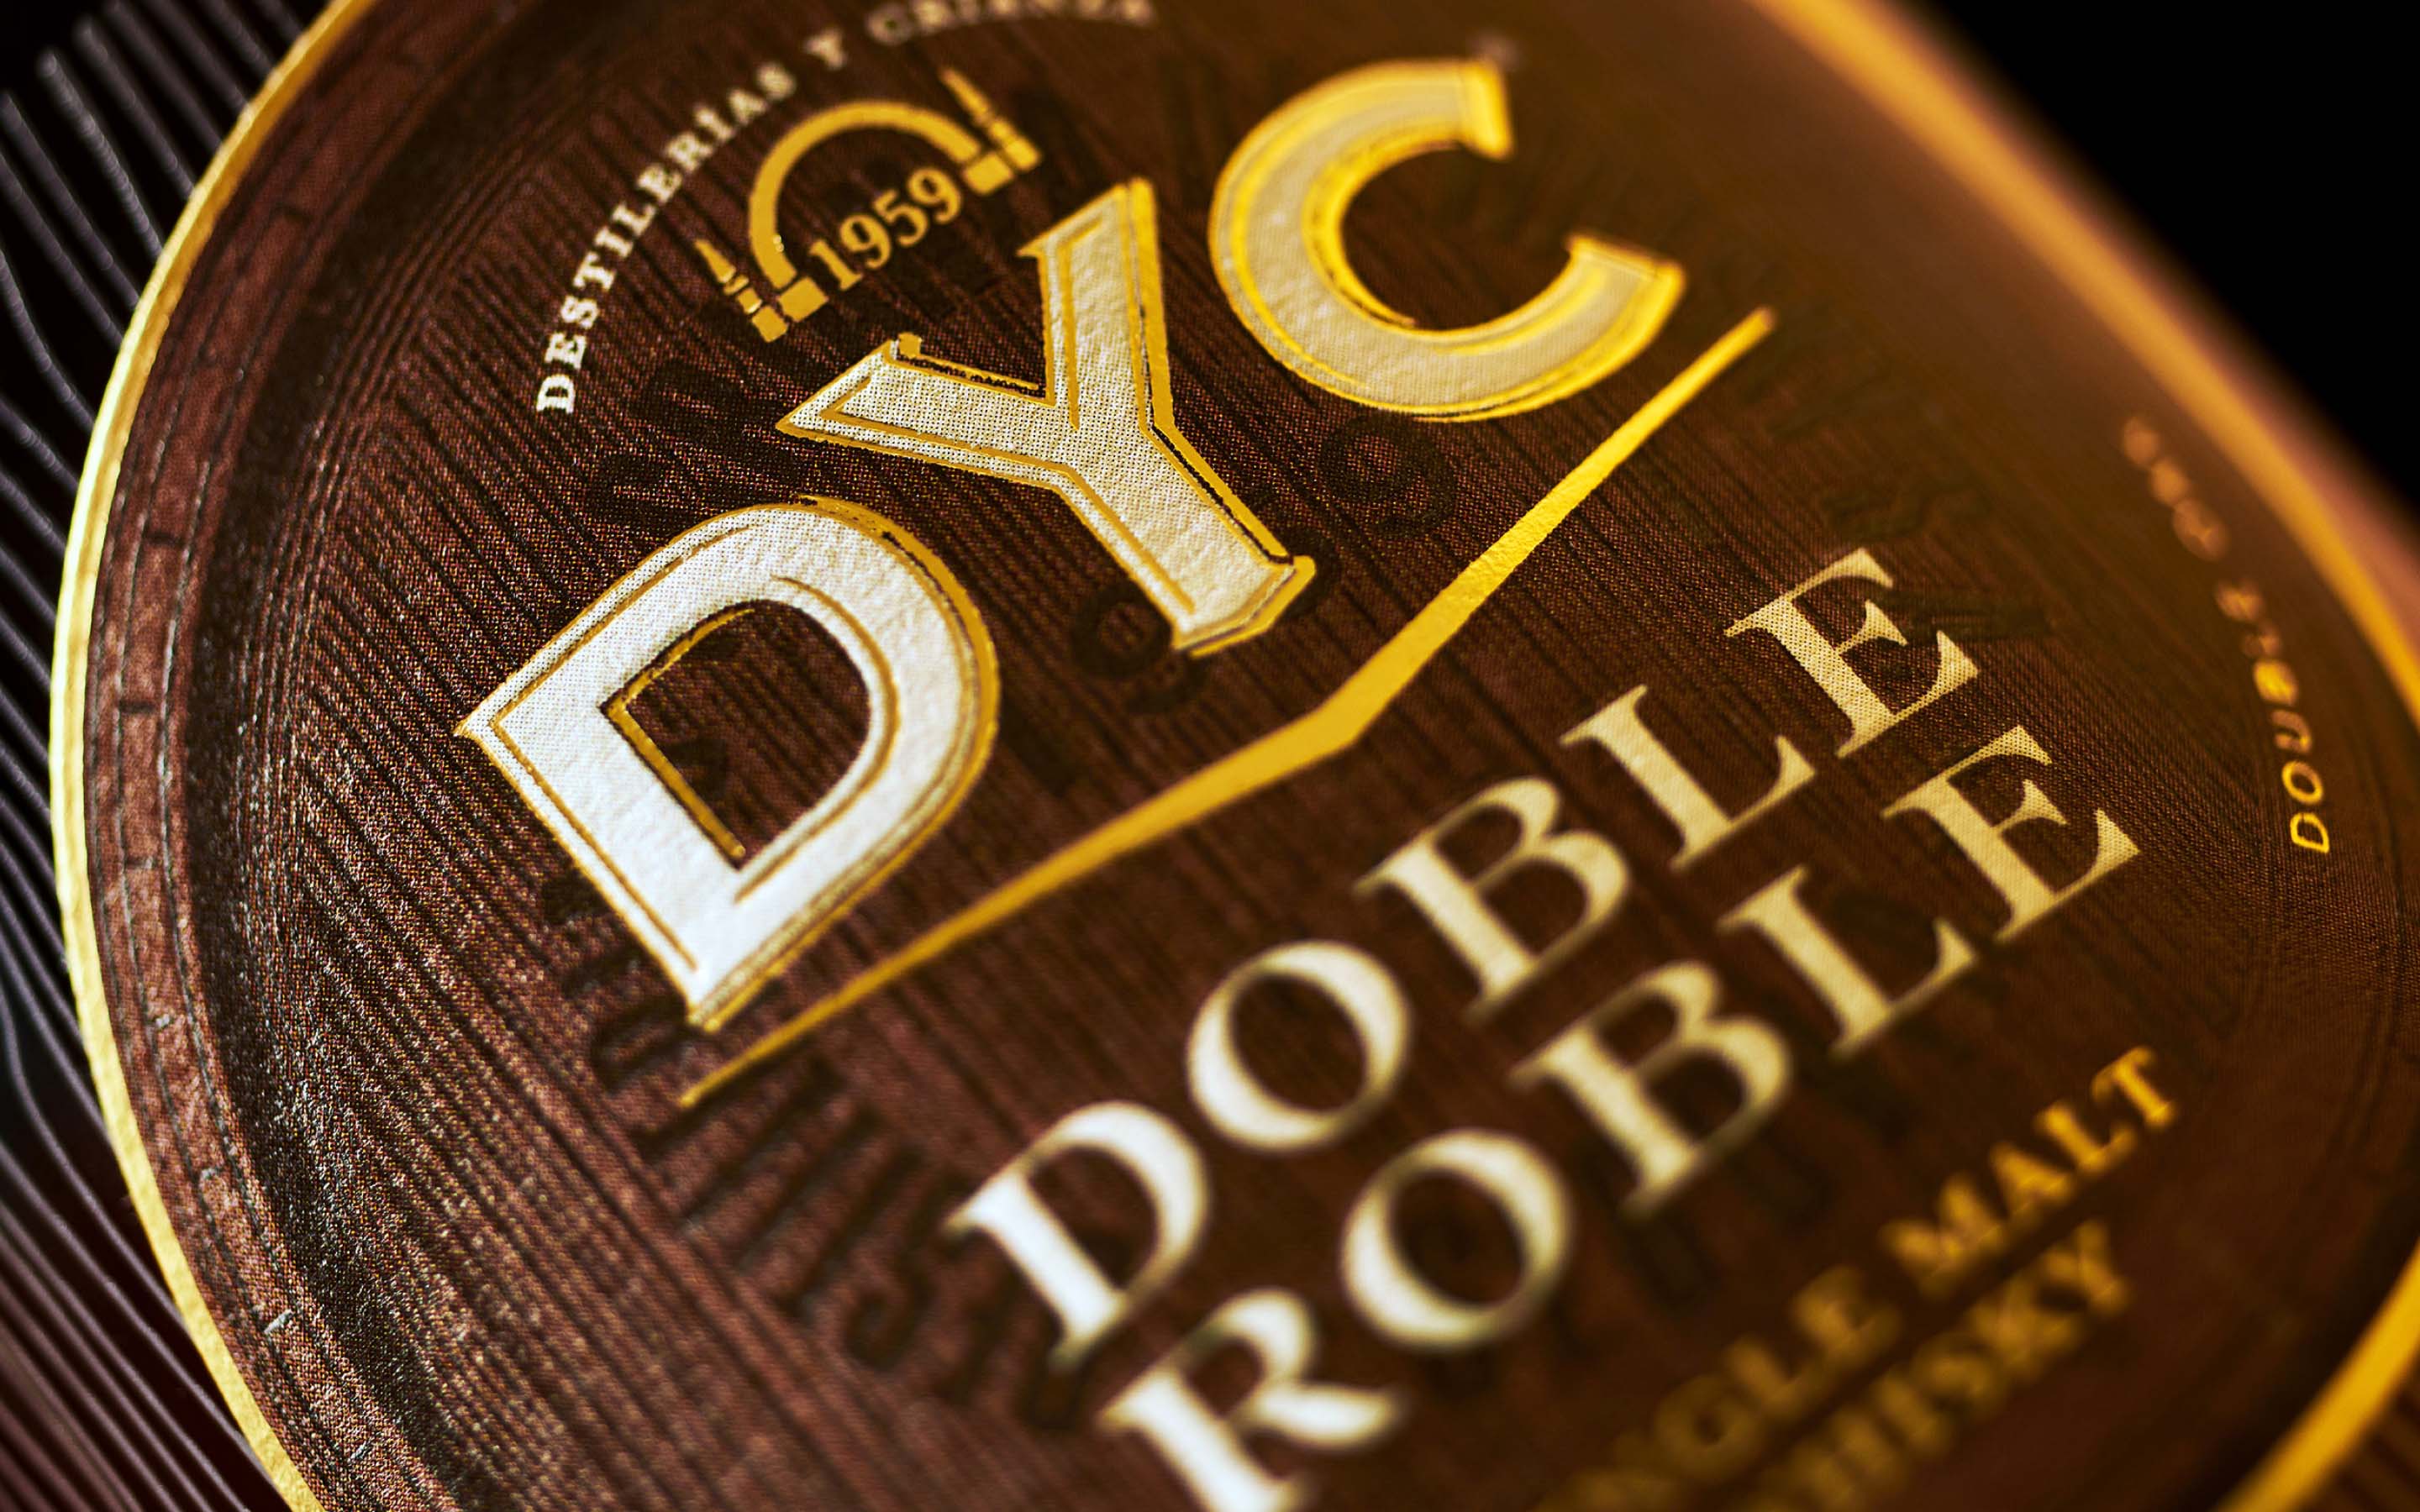 Originally from Segovia, DYC has been making top quality whiskies since 1959, characterized by a unique and nuanced flavour achieved through extensive experience, passion and a meticulous distillation process.

 

This exclusive collection is composed of a series of handcrafted whiskies, which fuse the character of this Segovian distillery and the founder of the house, Nicomedes García. The Master Distillers collection, which began with DYC 12 and its twelve years of aging, has already received recognition from the sector through prestigious awards. It was time to make DYC Doble Roble part of it.

 

 
